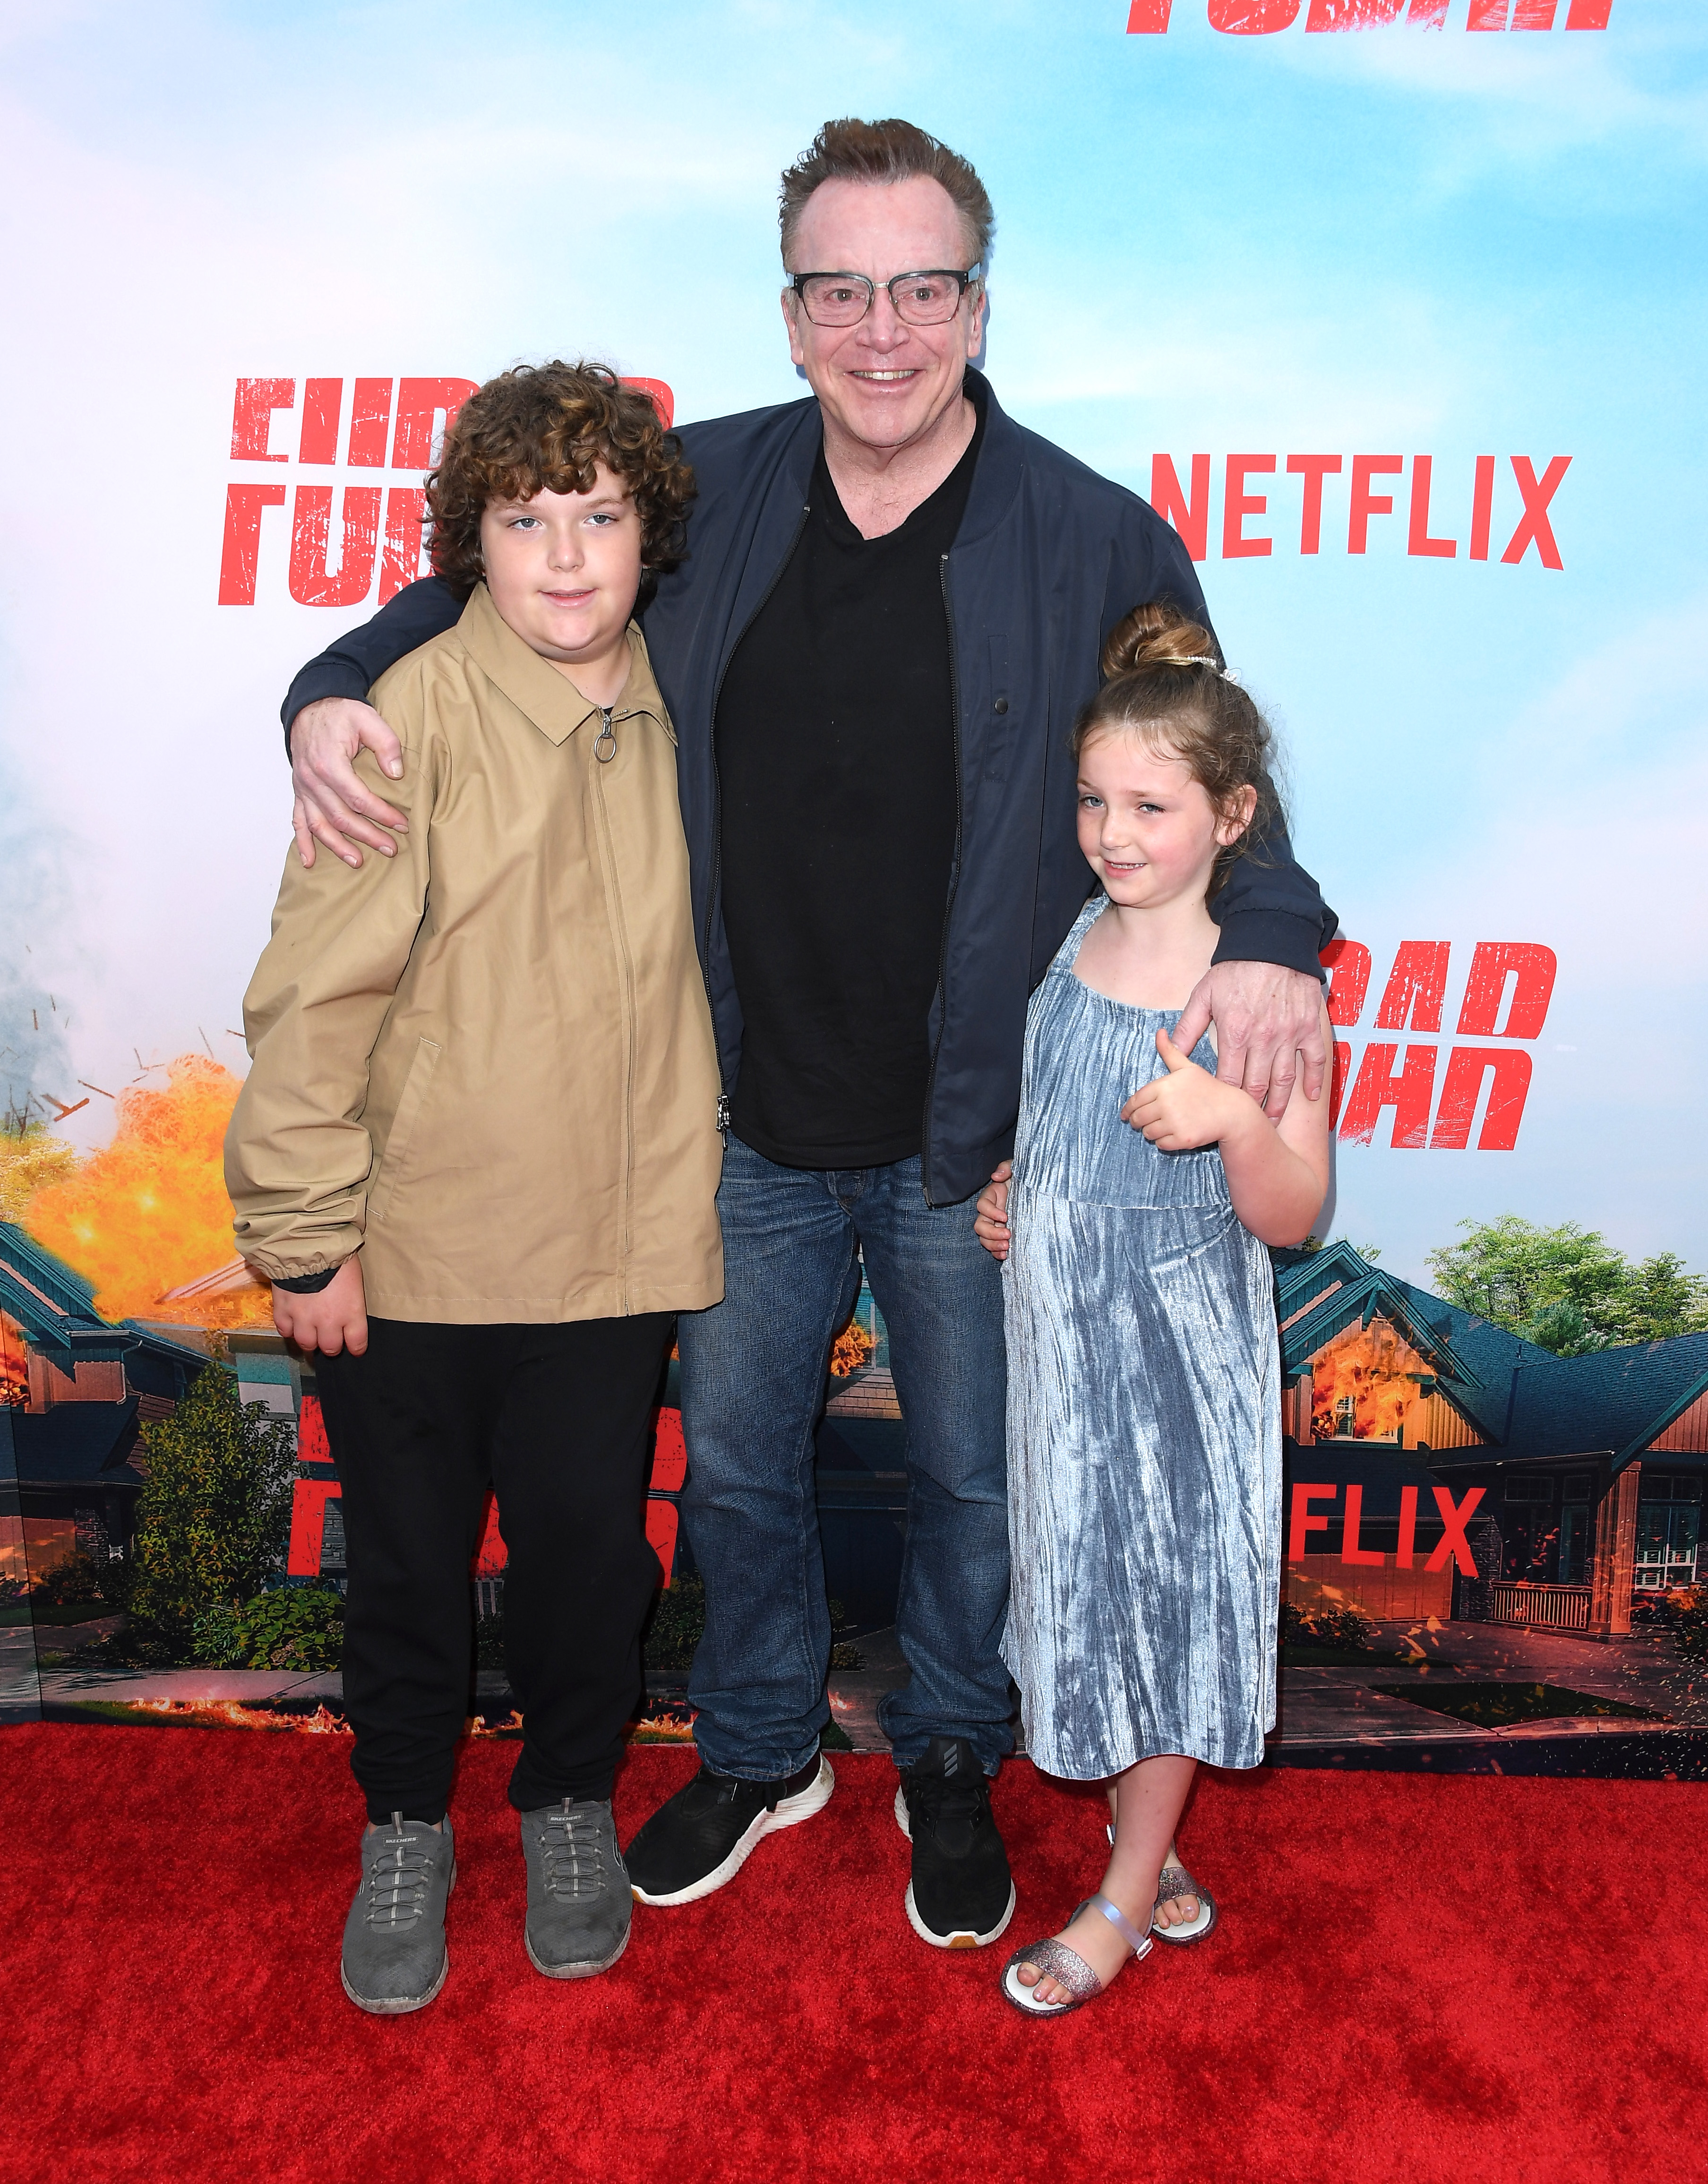 Jax, Tom, and Quinn Arnold at the Netflix premiere of "FUBAR" in Los Angeles, 2023 | Source: Getty Images